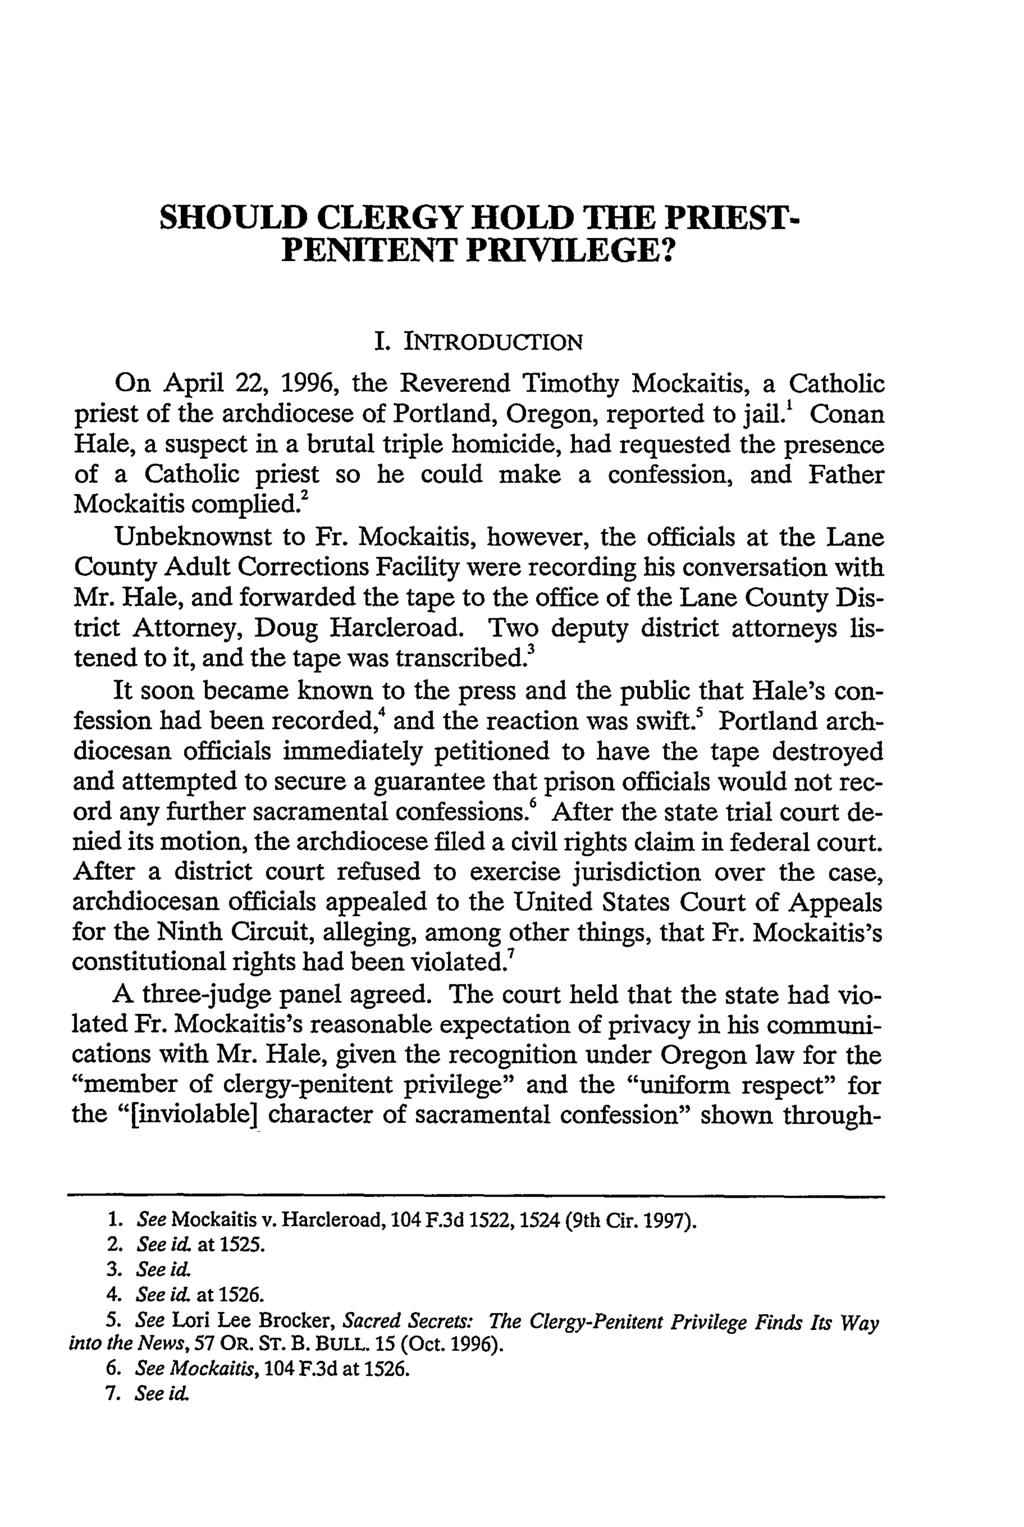 SHOULD CLERGY HOLD THE PRIEST- PENITENT PRIVILEGE? I. INTRODUCTION On April 22, 1996, the Reverend Timothy Mockaitis, a Catholic priest of the archdiocese of Portland, Oregon, reported to jail.